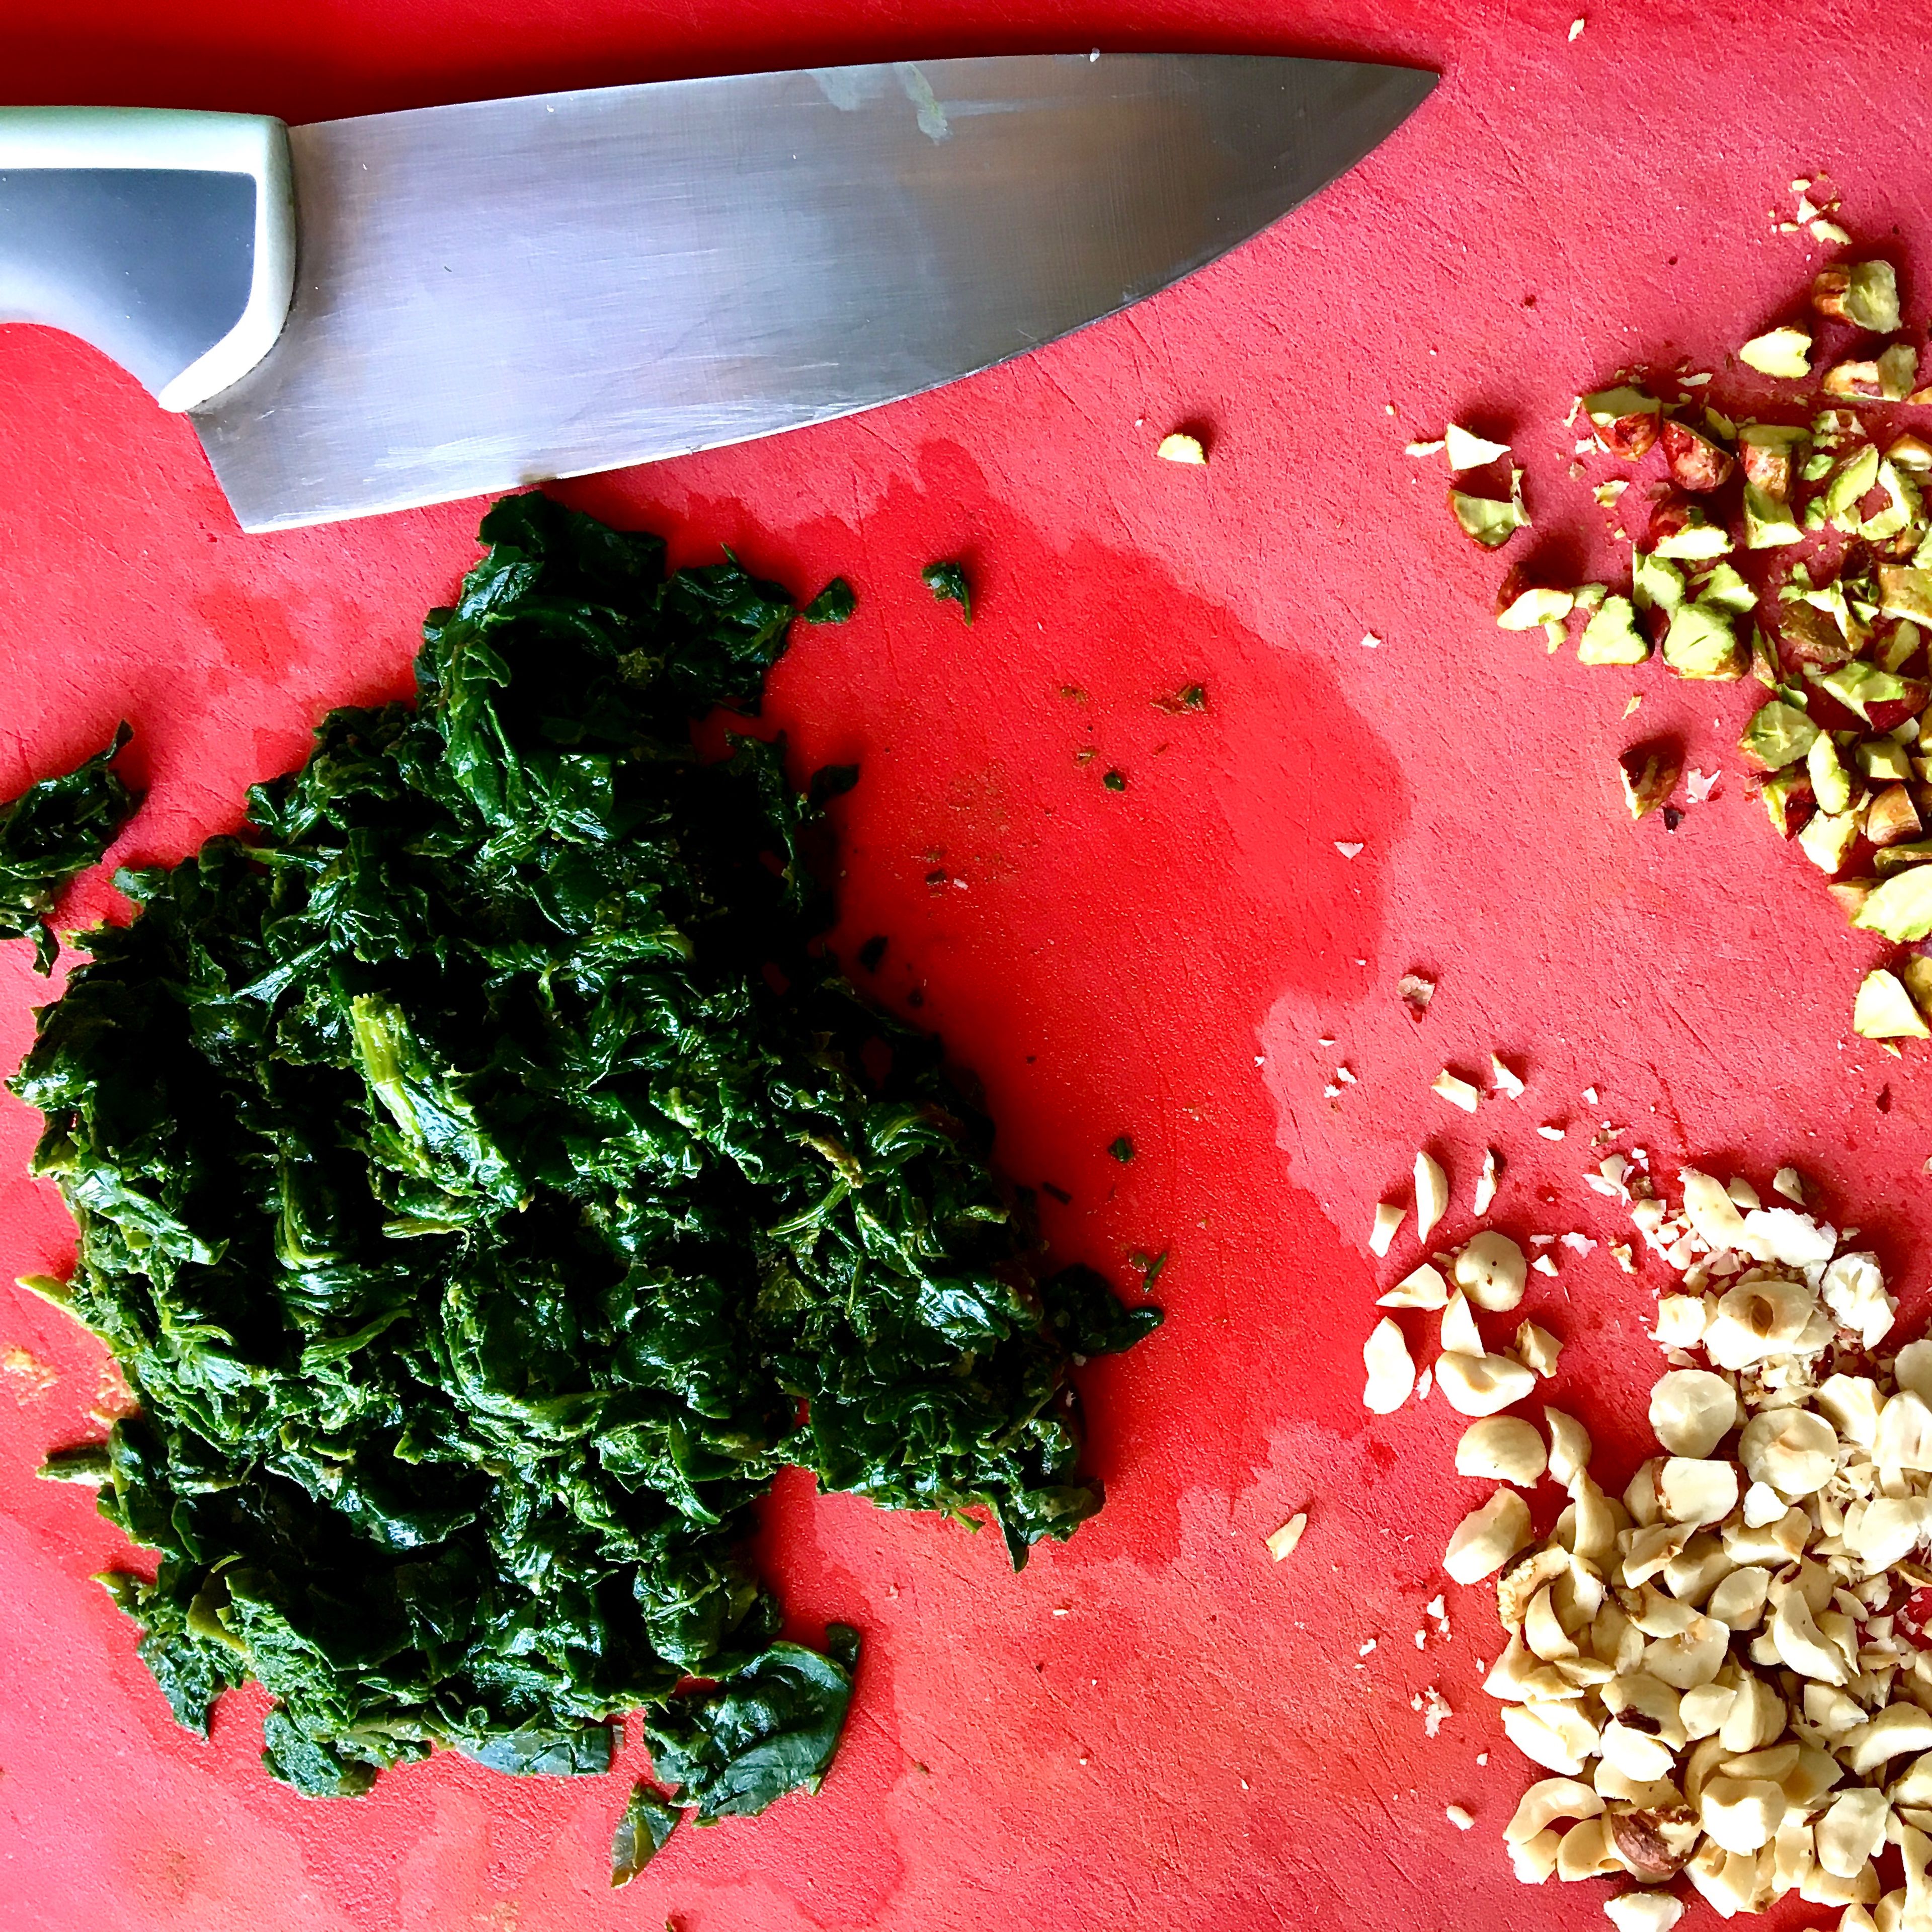 To prepare the filling, chop the sun-dried tomatoes if needed. For the spinach pesto, add the cooked or sautéed spinach, 25 g Parmesan, 2 tbsp olive oil and any nut/seeds you prefer to a blender. I used flaxseeds for the first time and hazelnuts for second. Blend into a paste and season with salt and pepper. Set aside until needed.